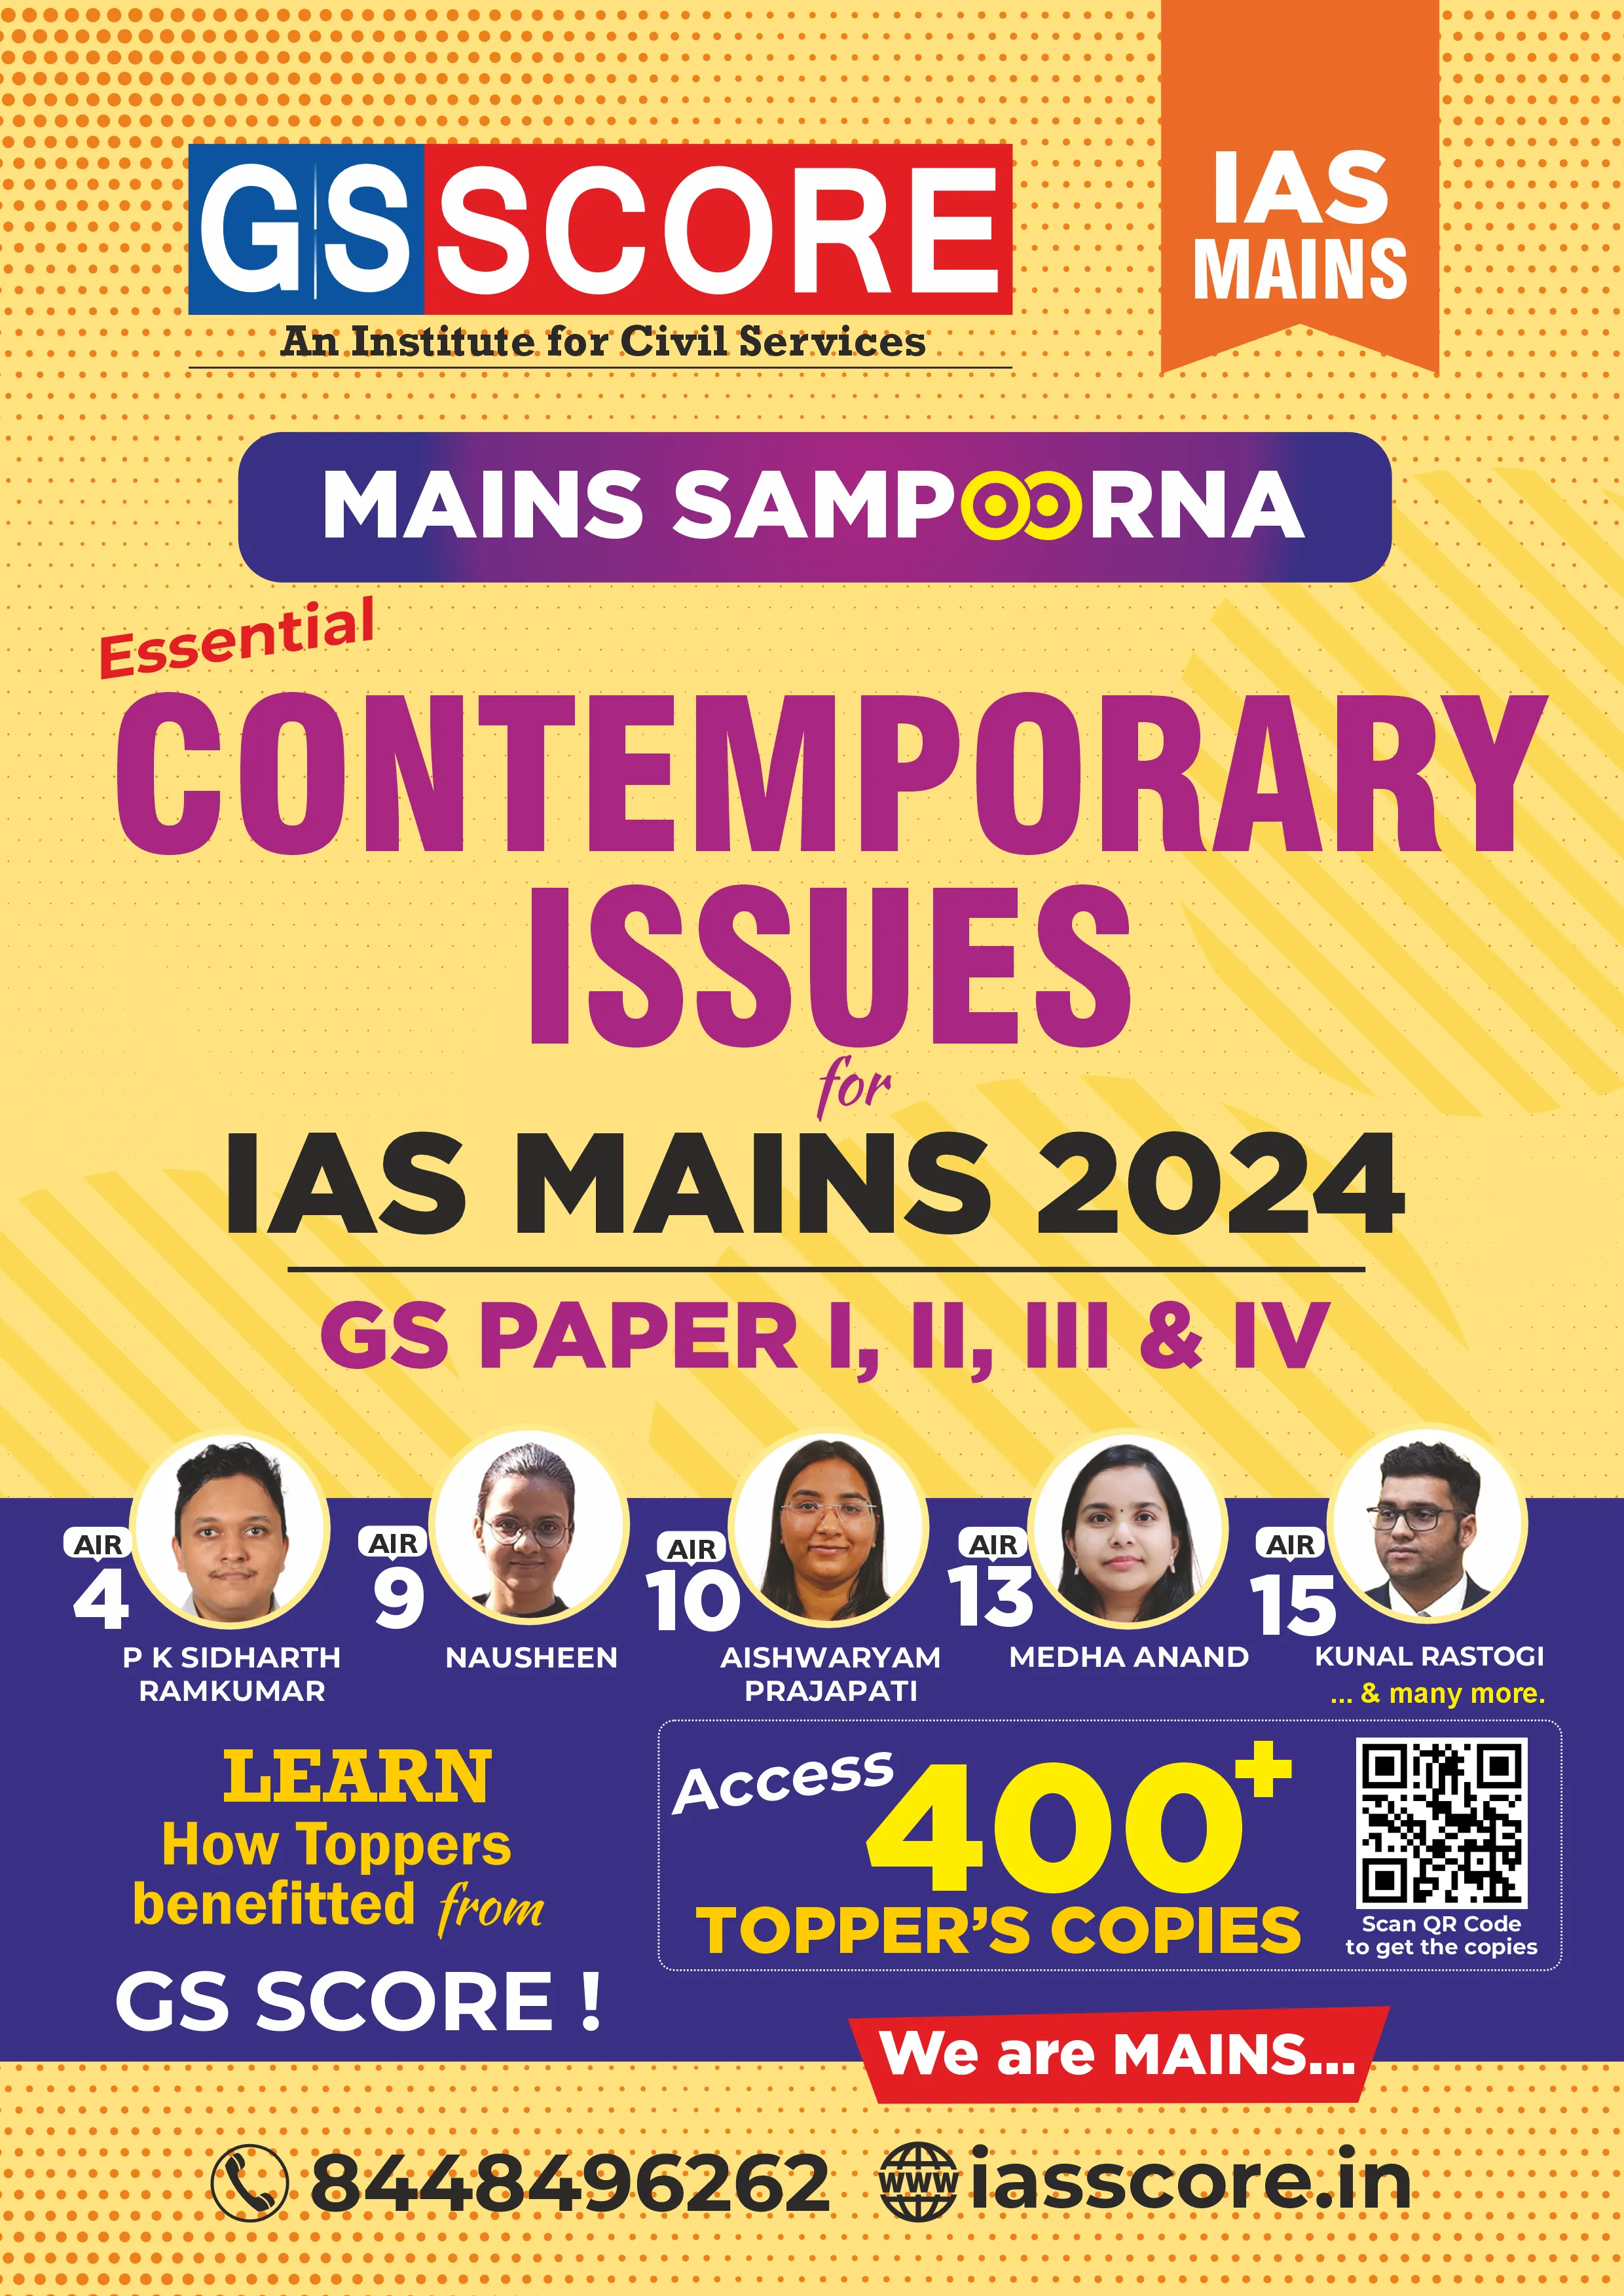 Essential Contemporary Issues Listing for UPSC Mains 2024